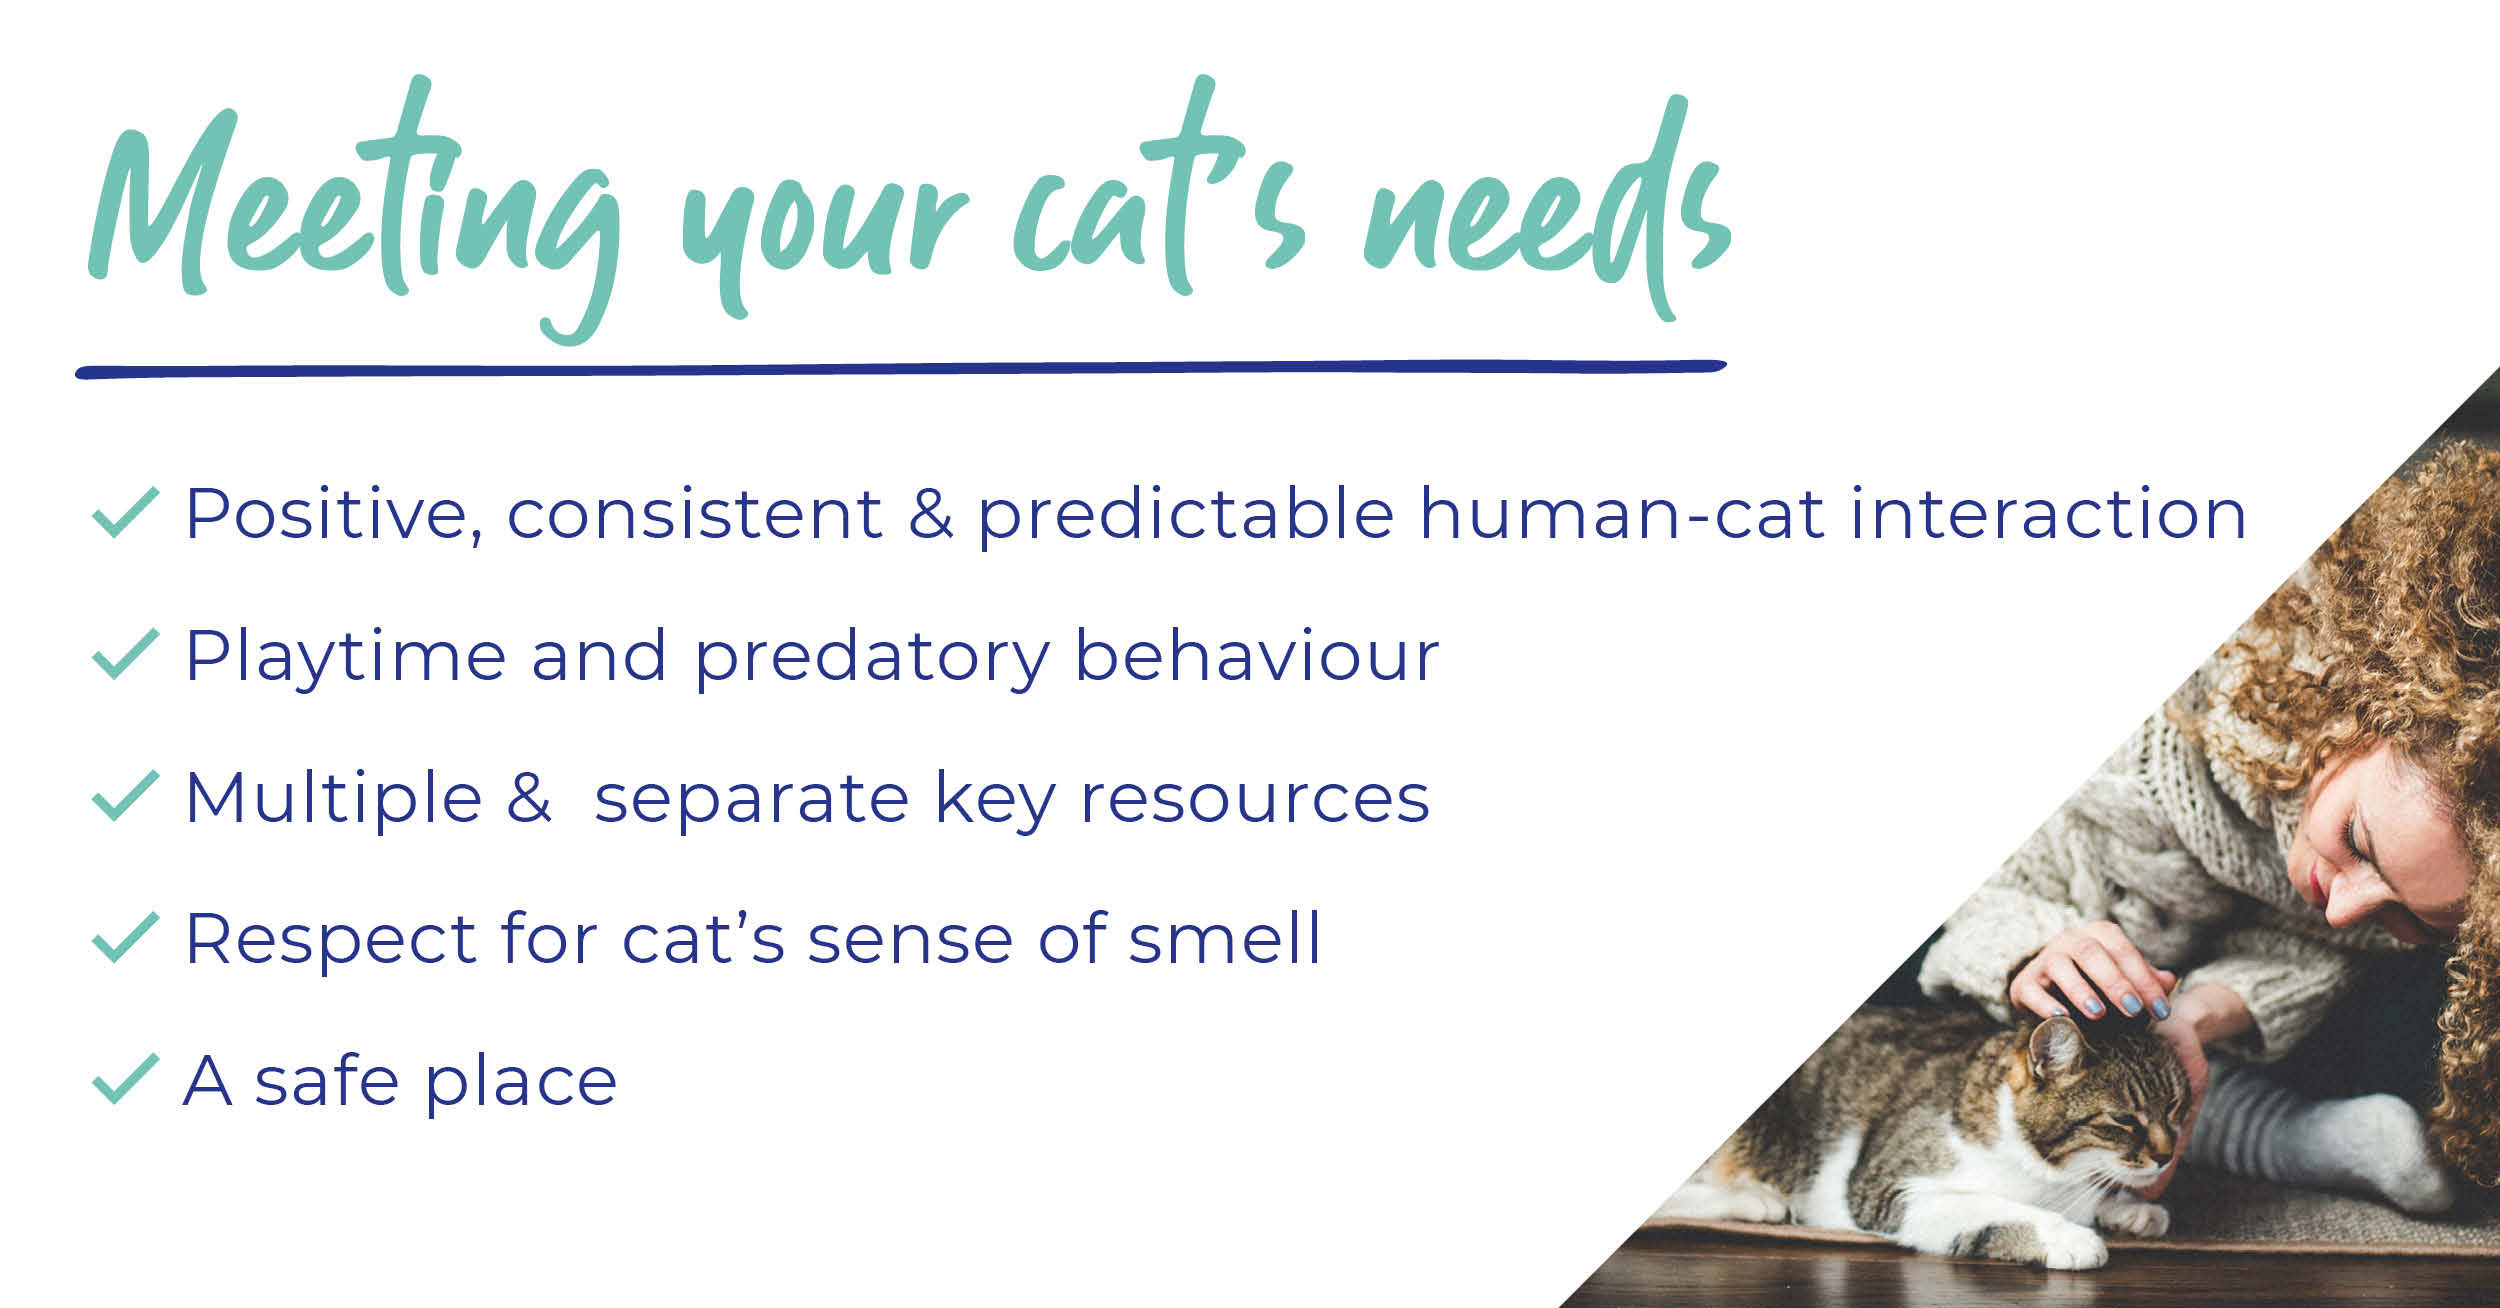 Caring for your cat - An owner's guide